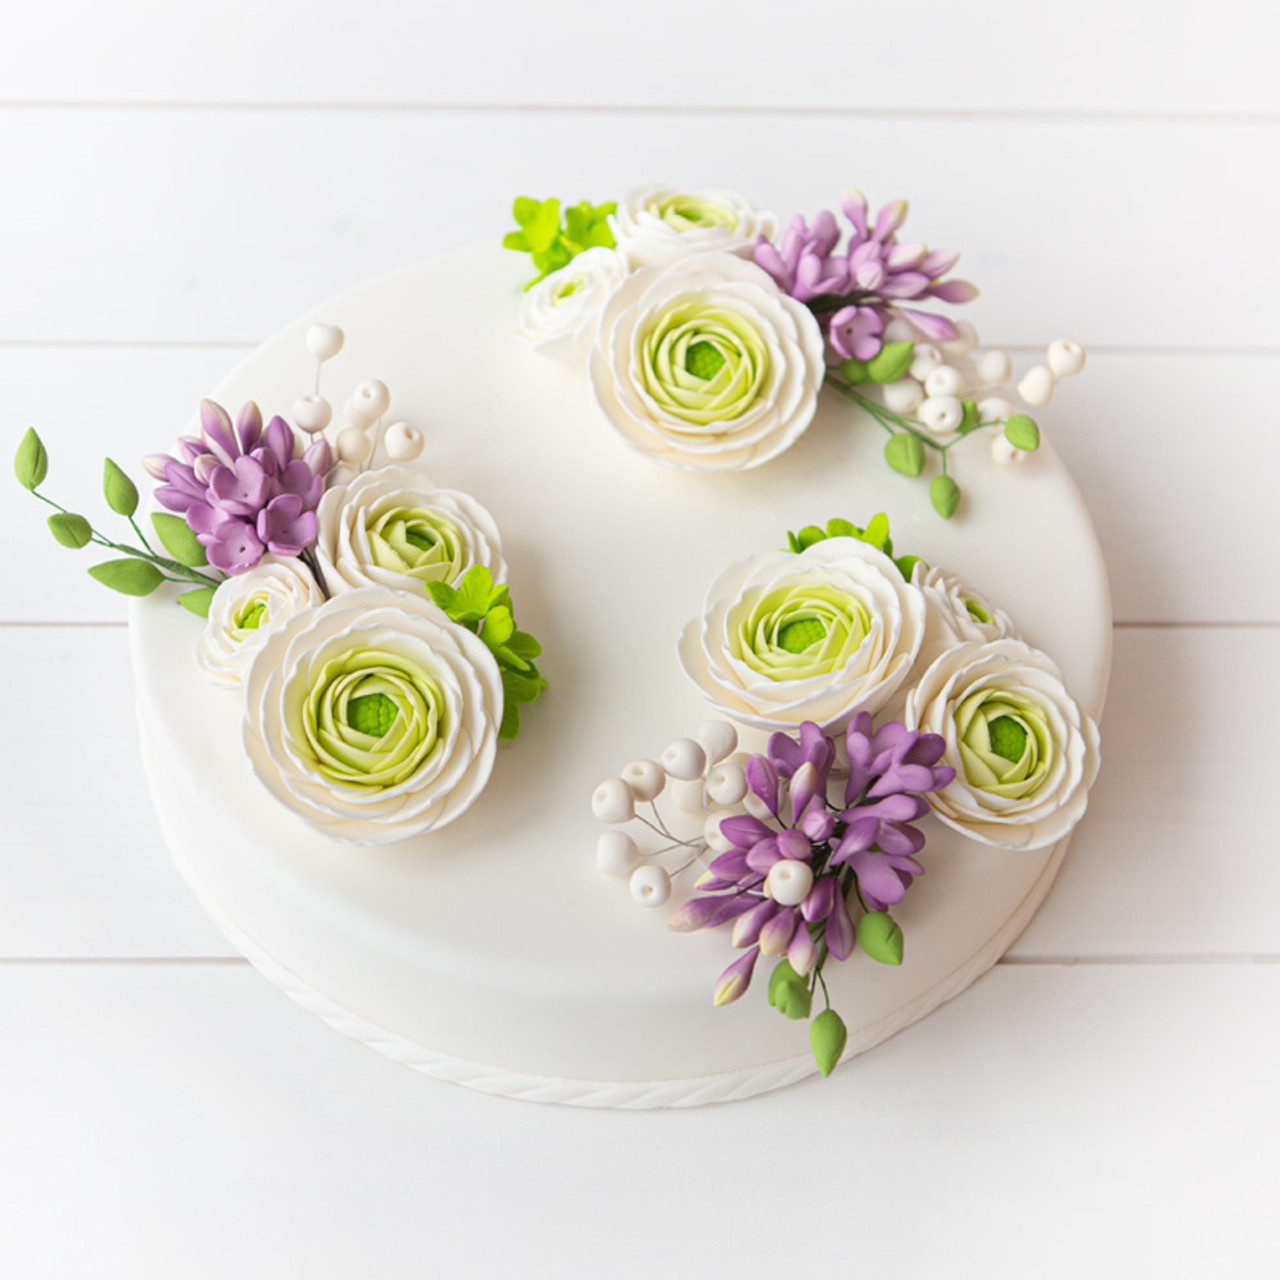 Example of a Cake you can create using the white floral bud spray with the additional of other floral pieces.